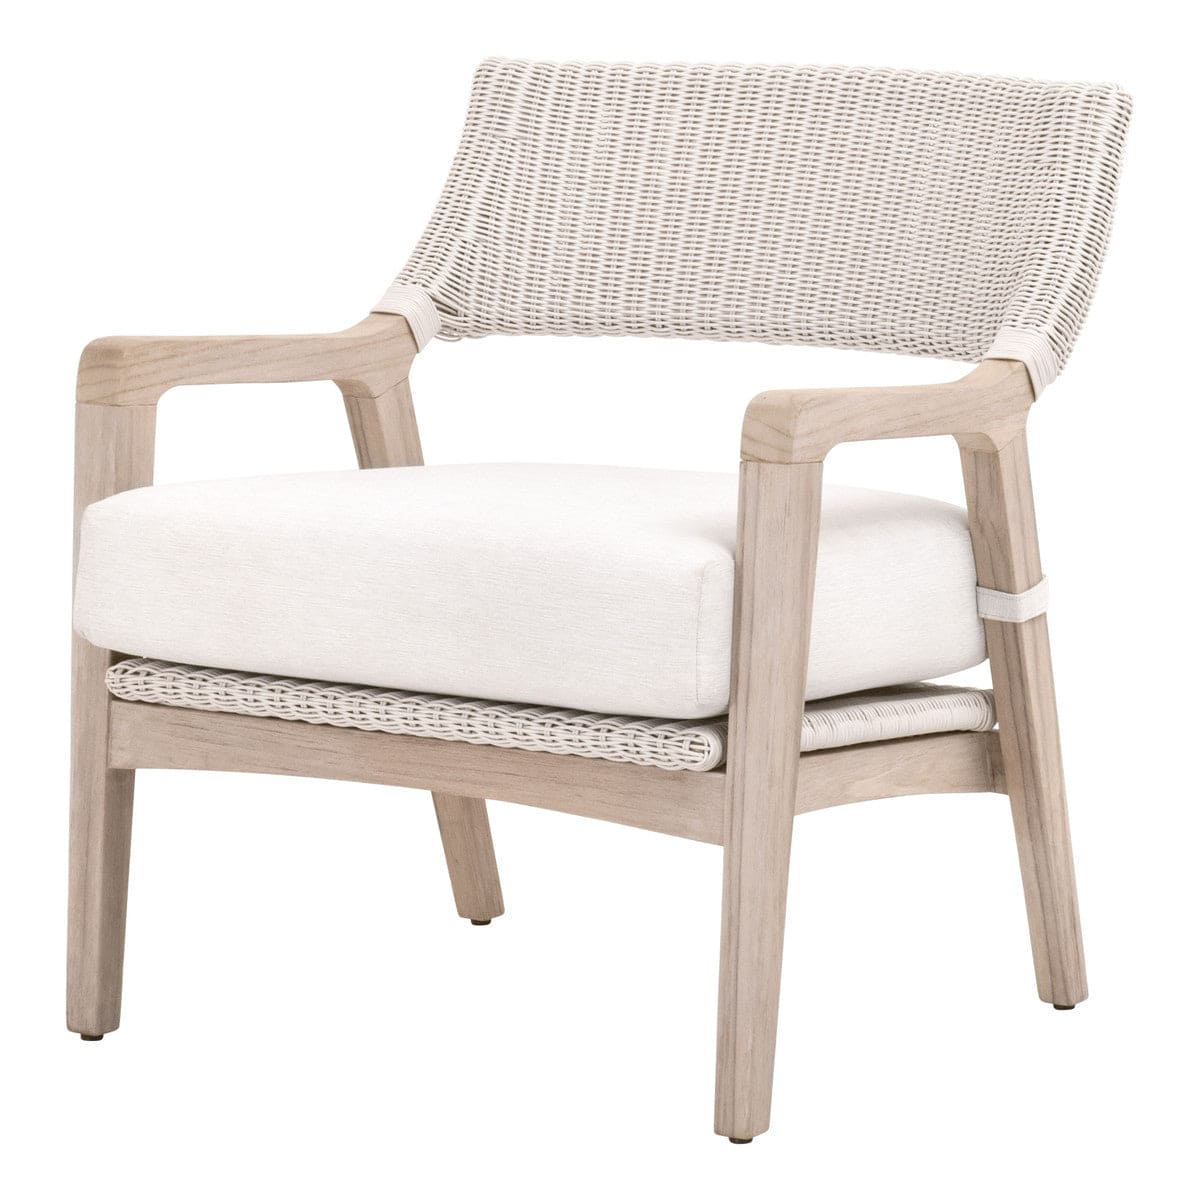 Woven Lucia Outdoor Club Chair Side